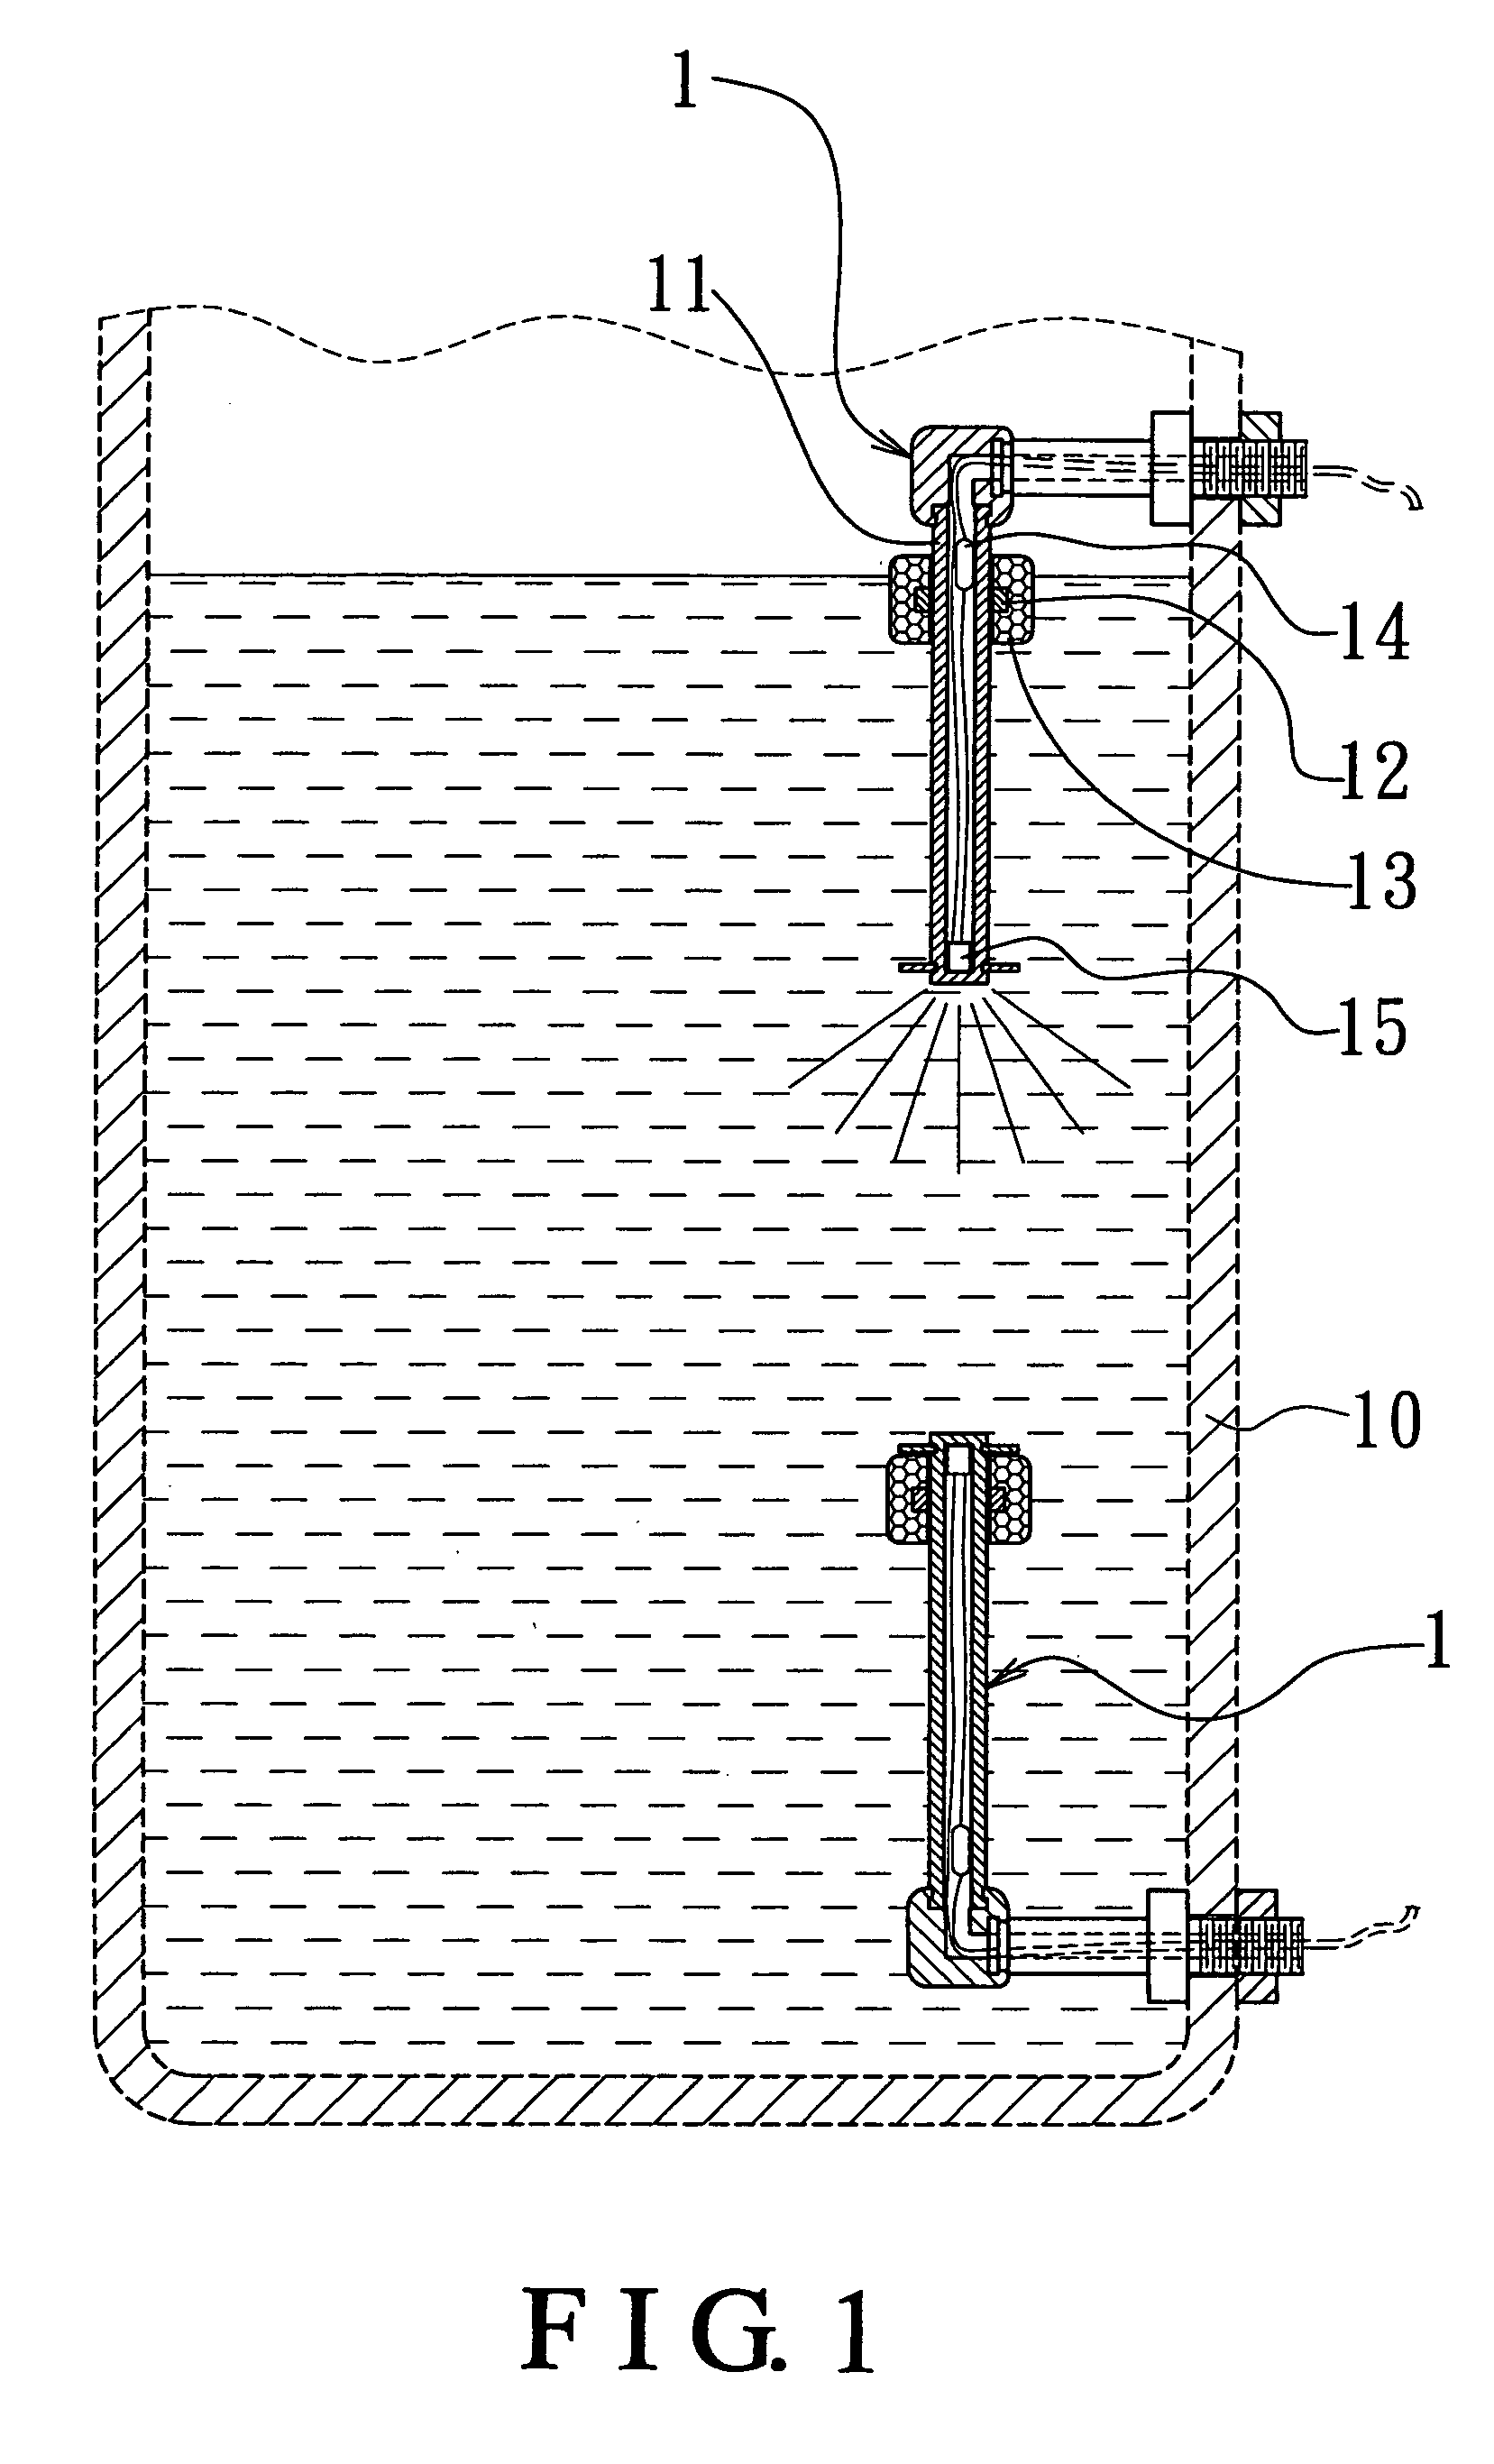 Float-type liquid level switch assembly with light emitting elements